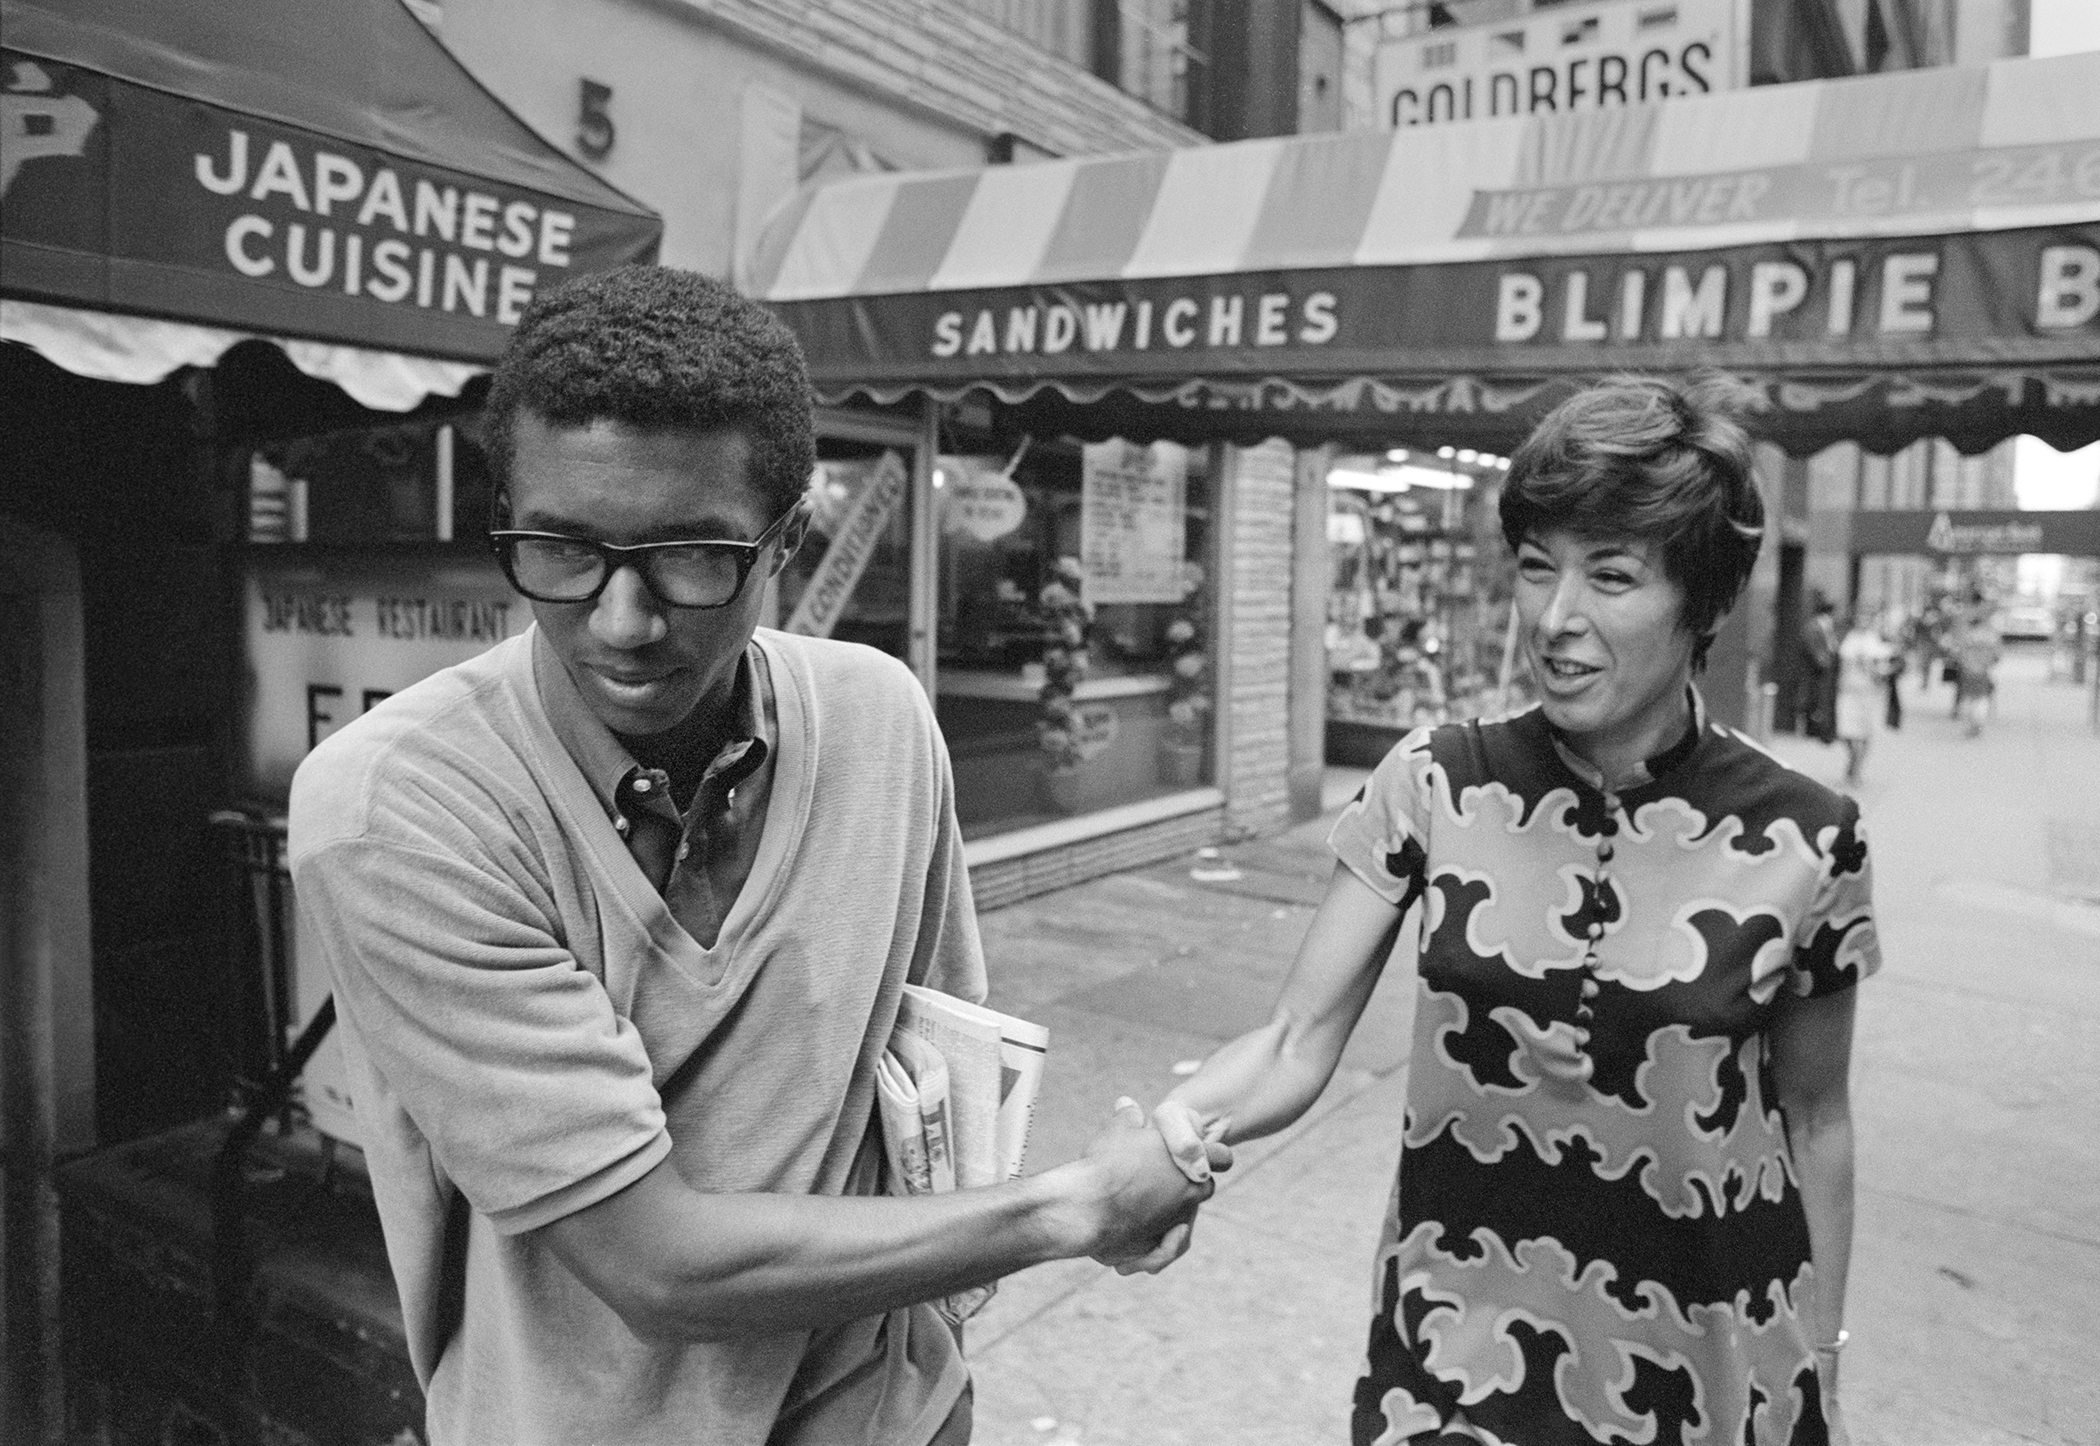 Arthur Ashe shakes hands with a fan in New York City, September 10, 1968, the day after winning the U.S. Open Men's Singles Championship. Photograph by John G. Zimmerman.